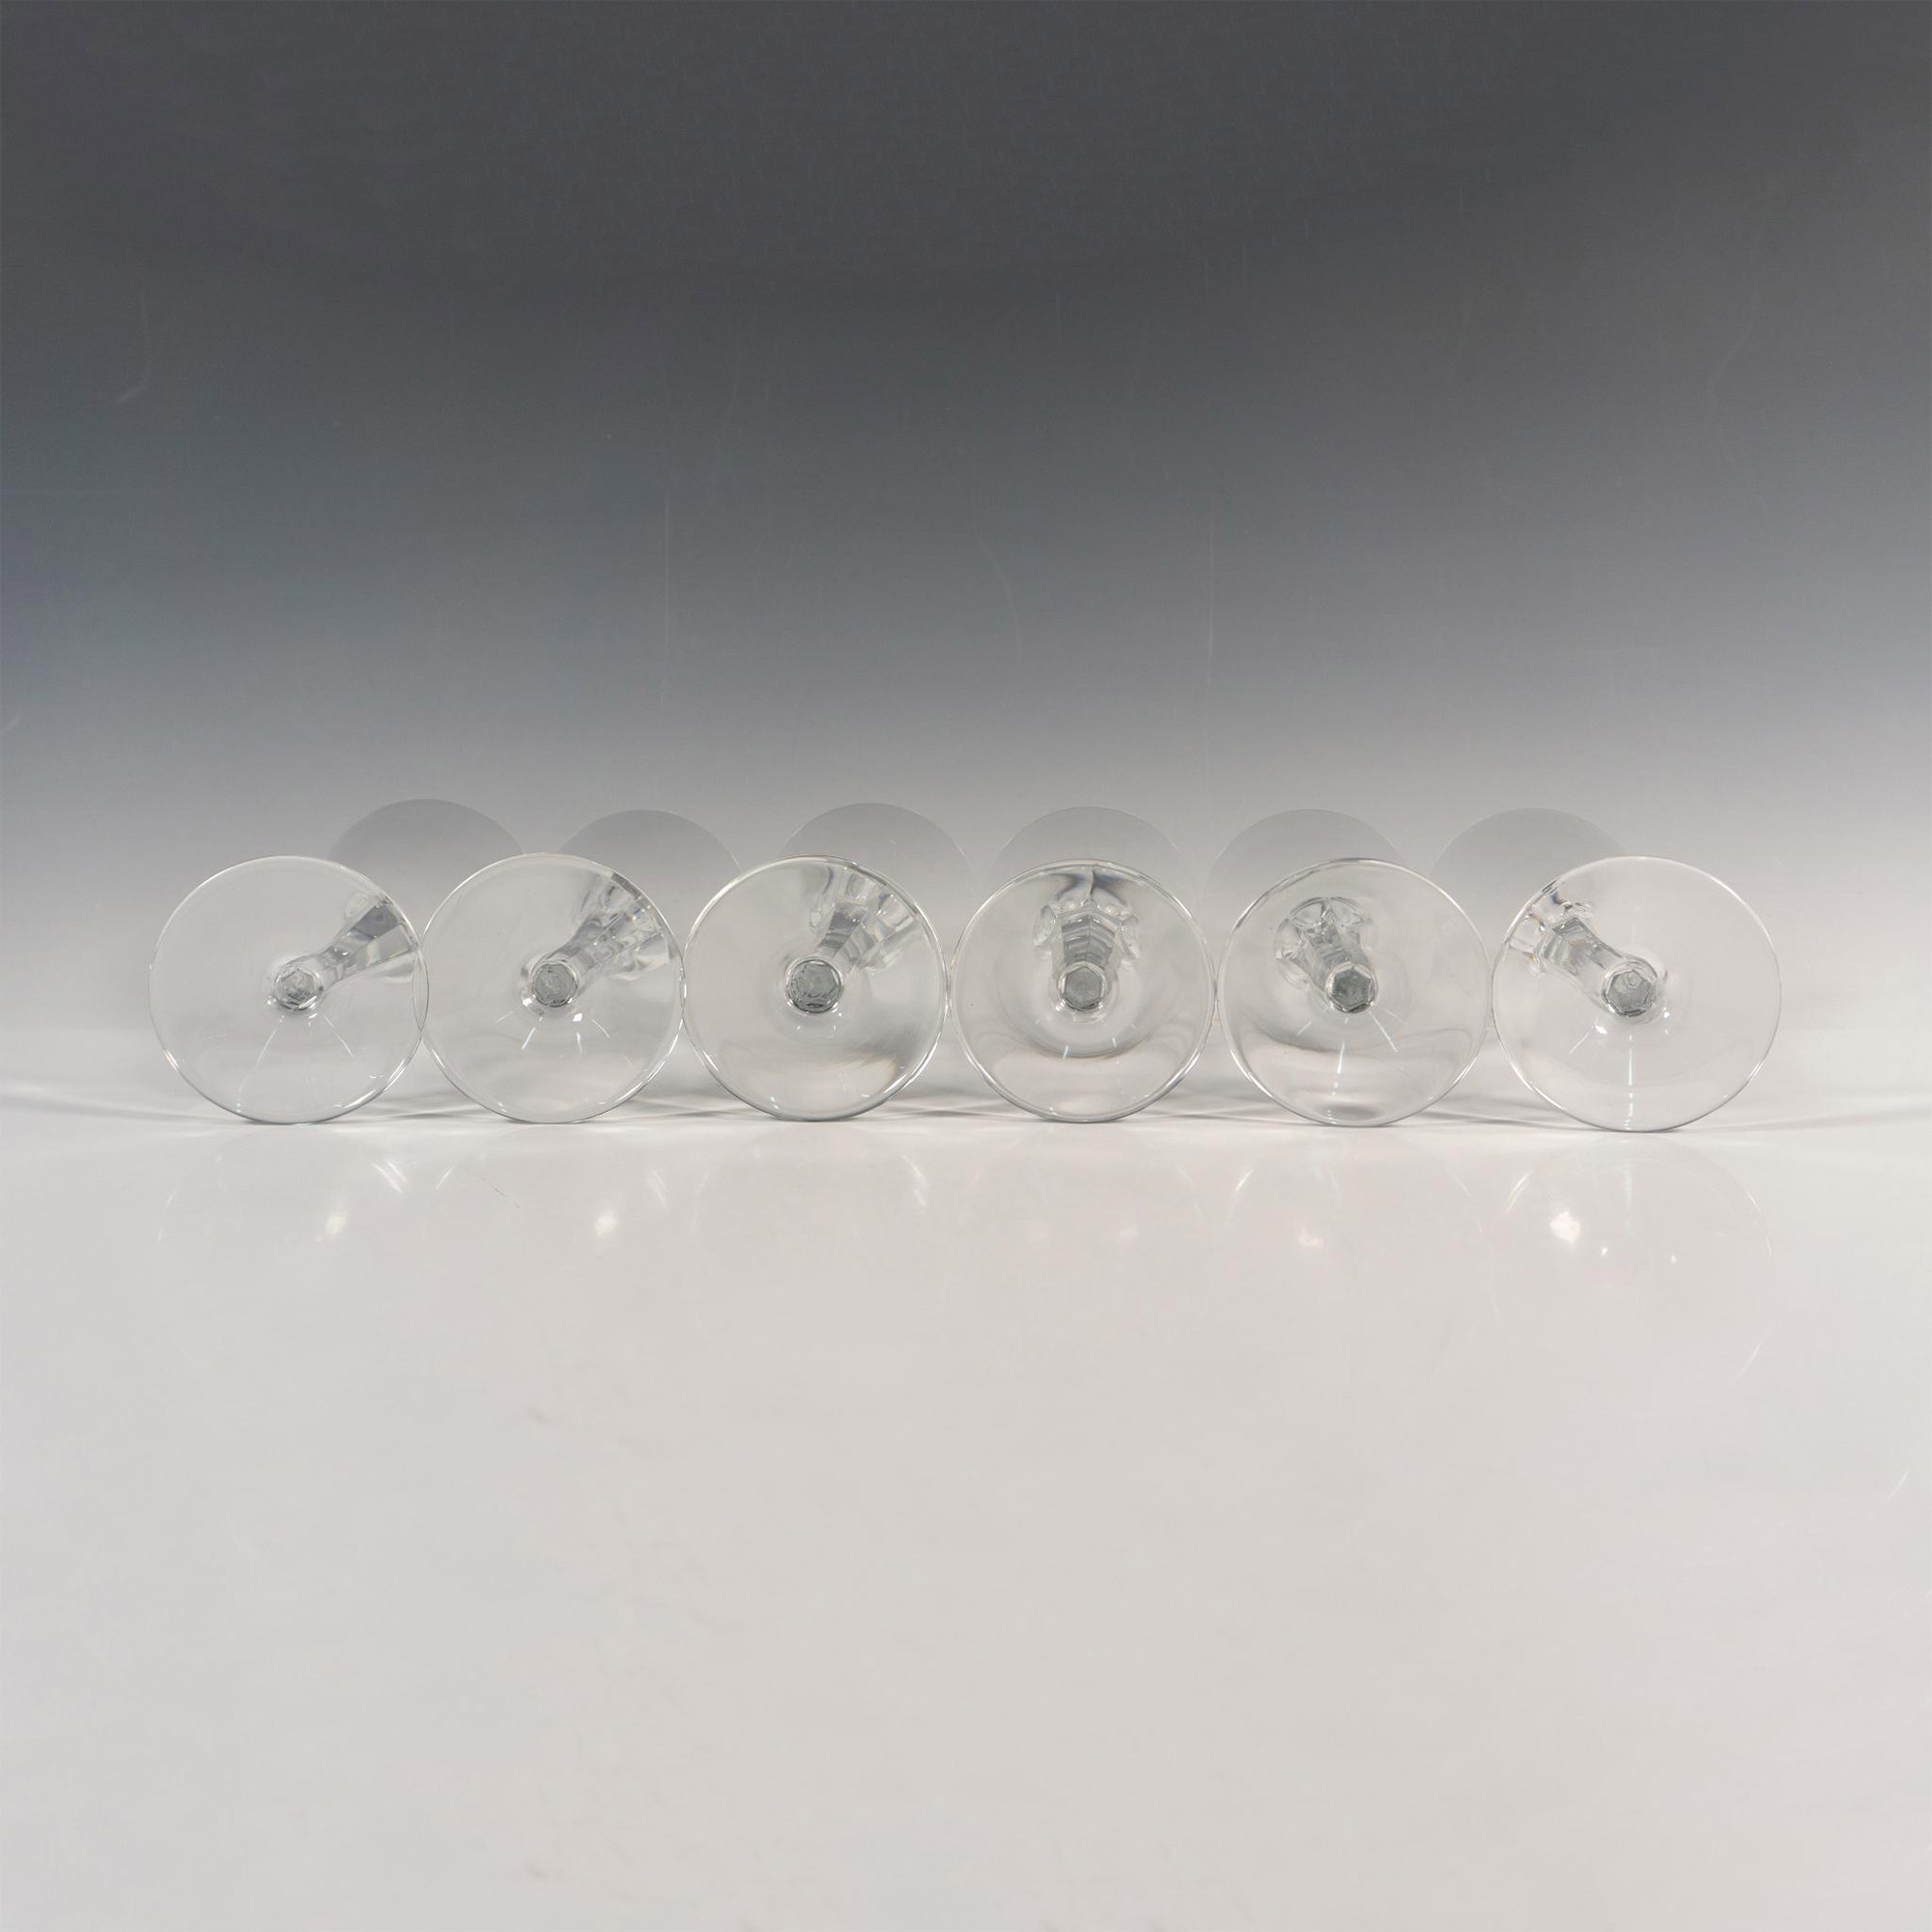 6pc Baccarat Wine Glasses - Image 2 of 3